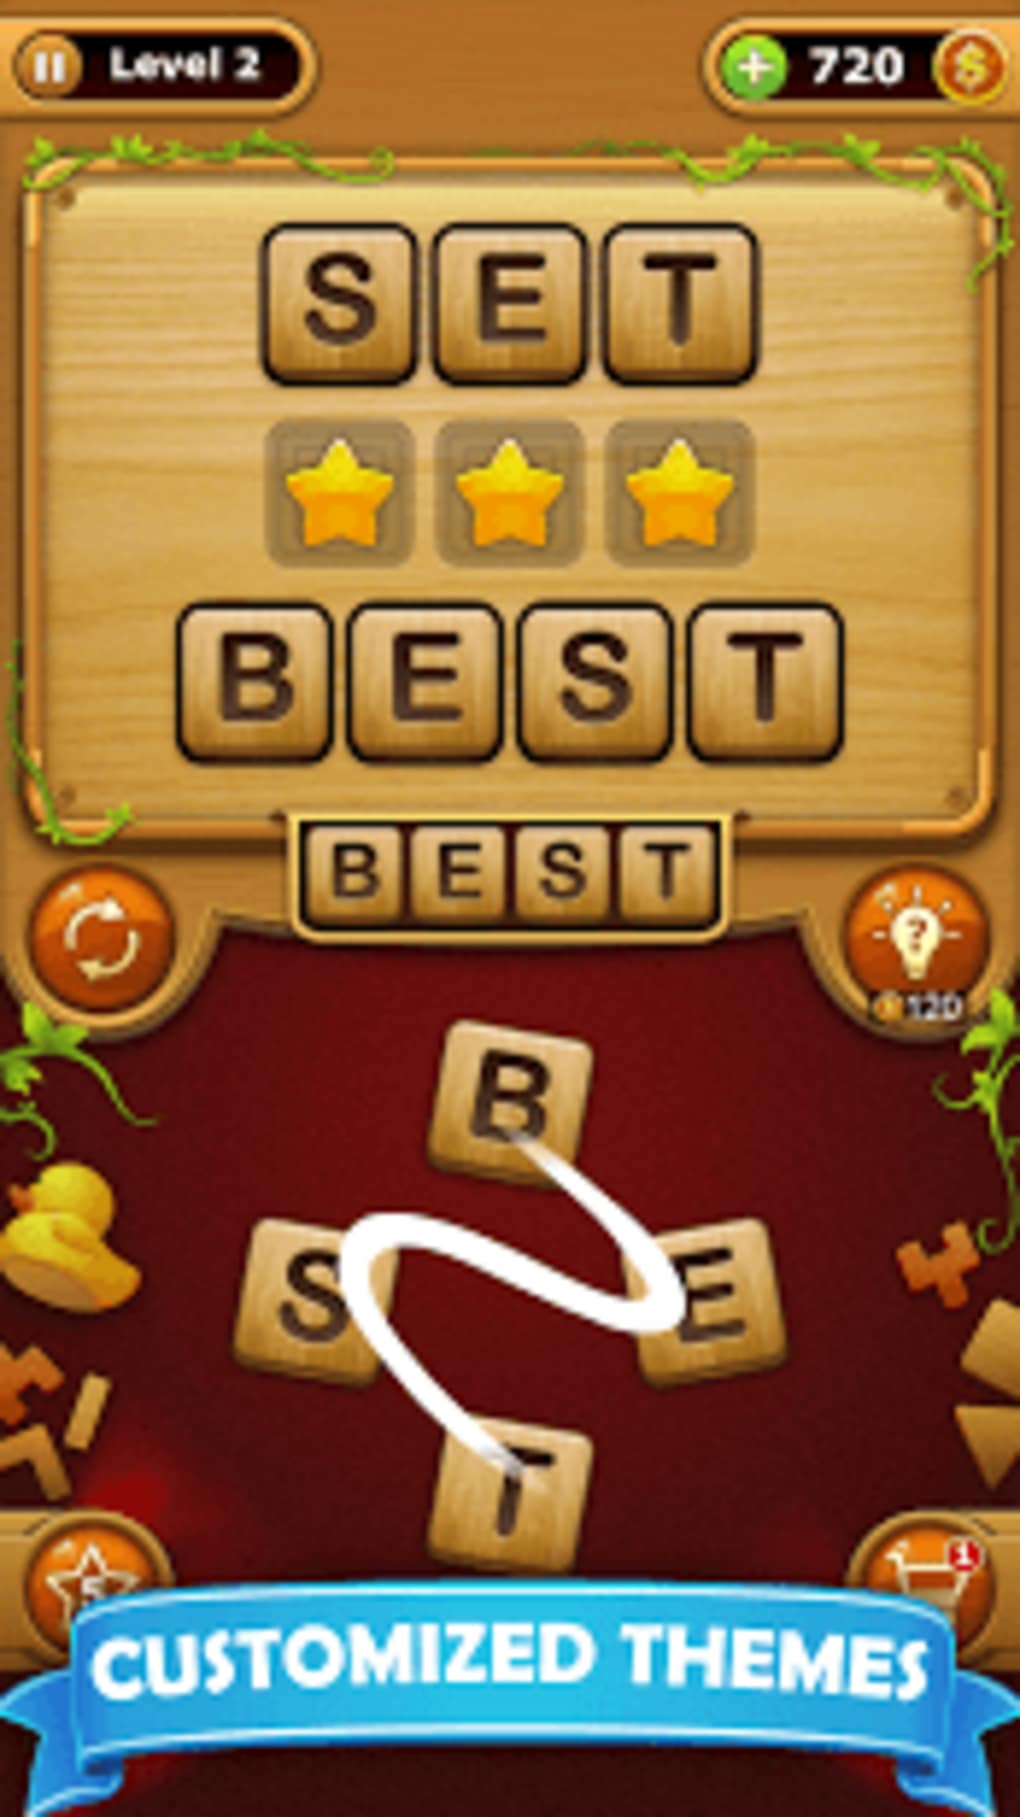 word connect game